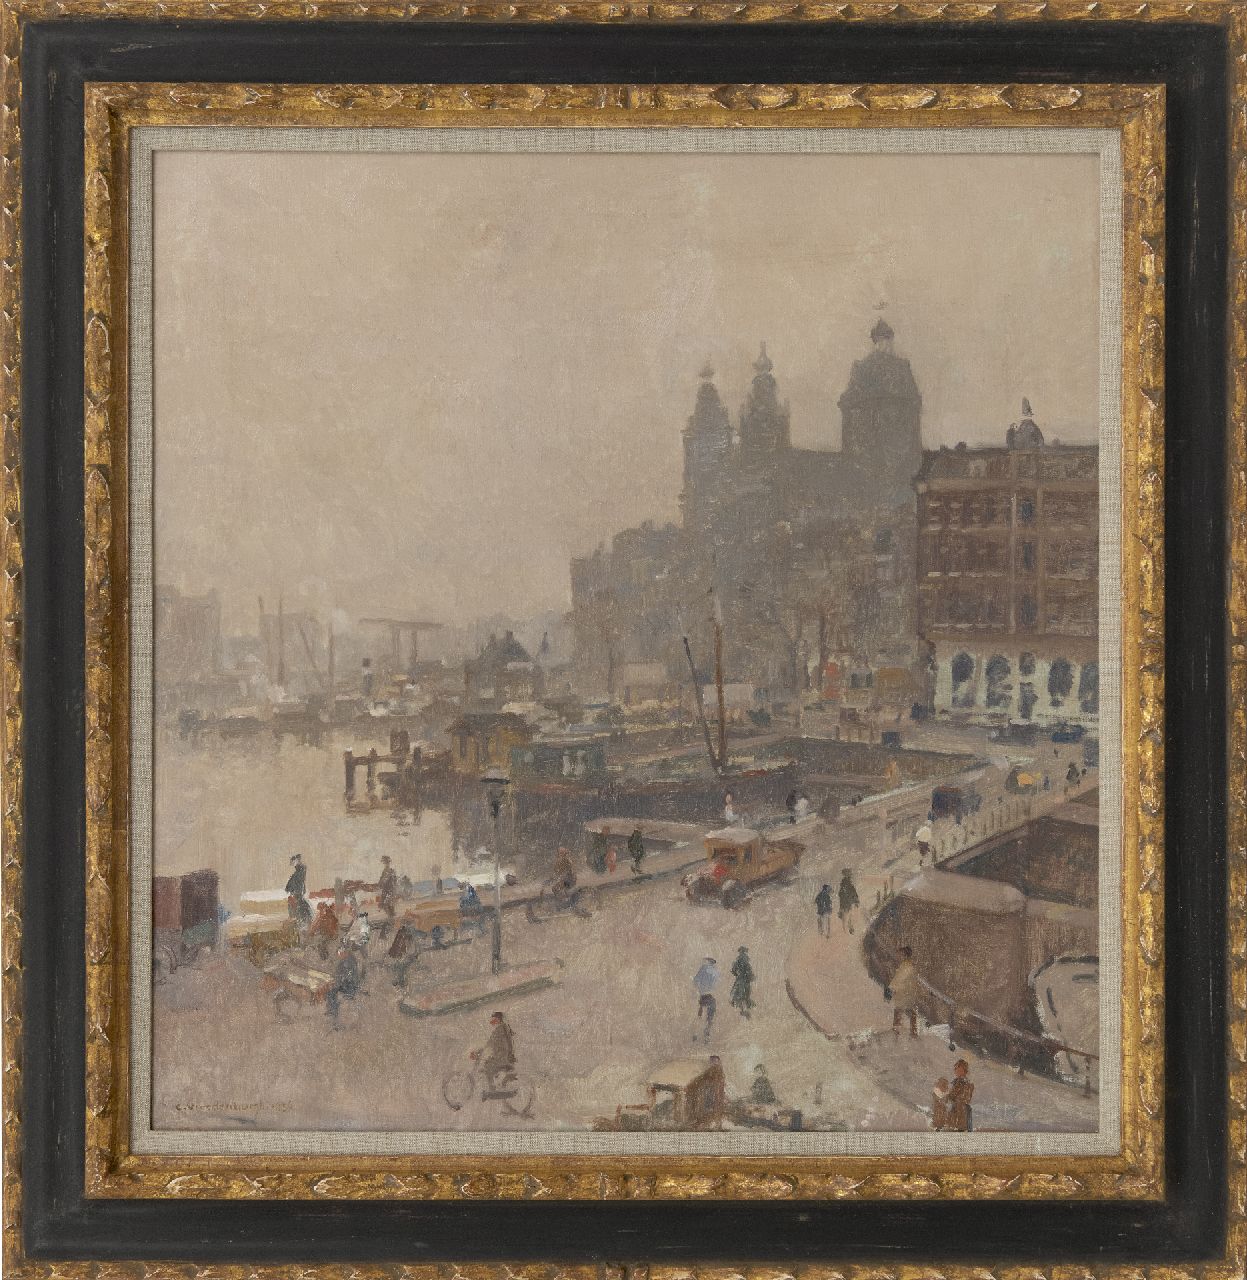 Vreedenburgh C.  | Cornelis Vreedenburgh | Paintings offered for sale | View of Amsterdam with the St. Nicolaas church, oil on canvas 52.3 x 50.7 cm, signed l.l. and dated 1936